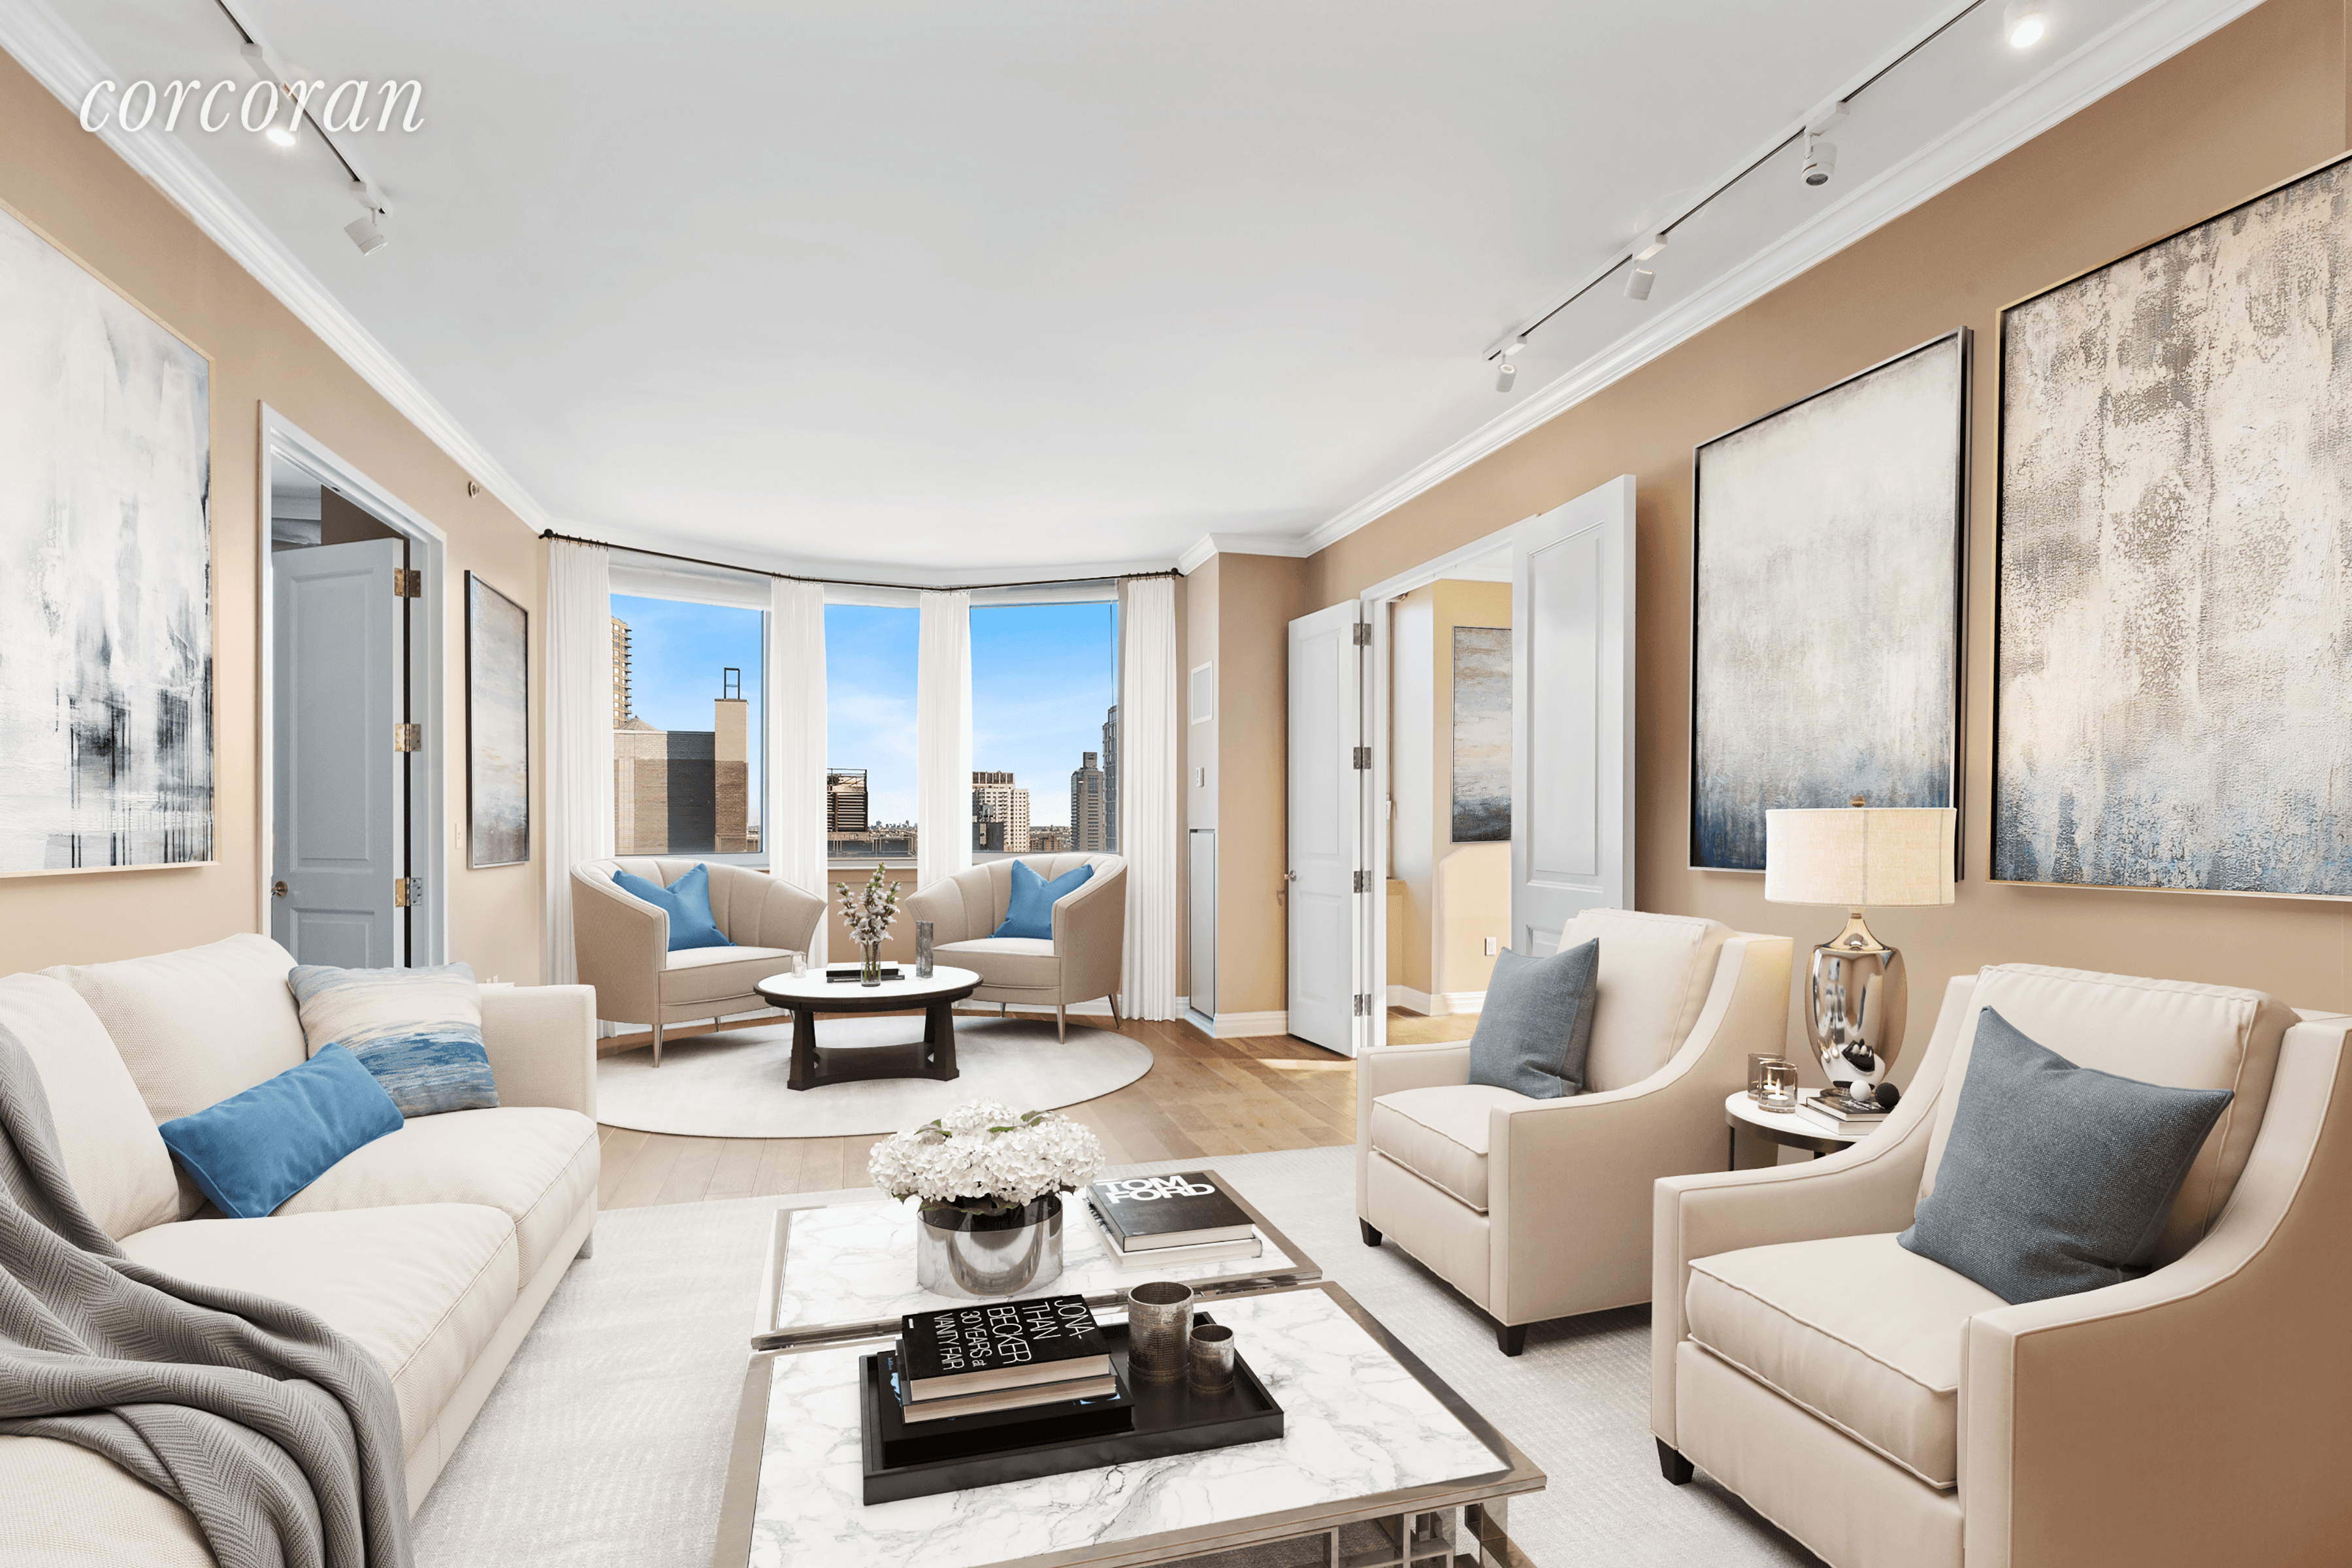 Perfectly located on the 22nd Floor of the premier white glove condominium, The Empire, this corner sun flooded home spans approximately 2, 500 square feet with picturesque open city views ...